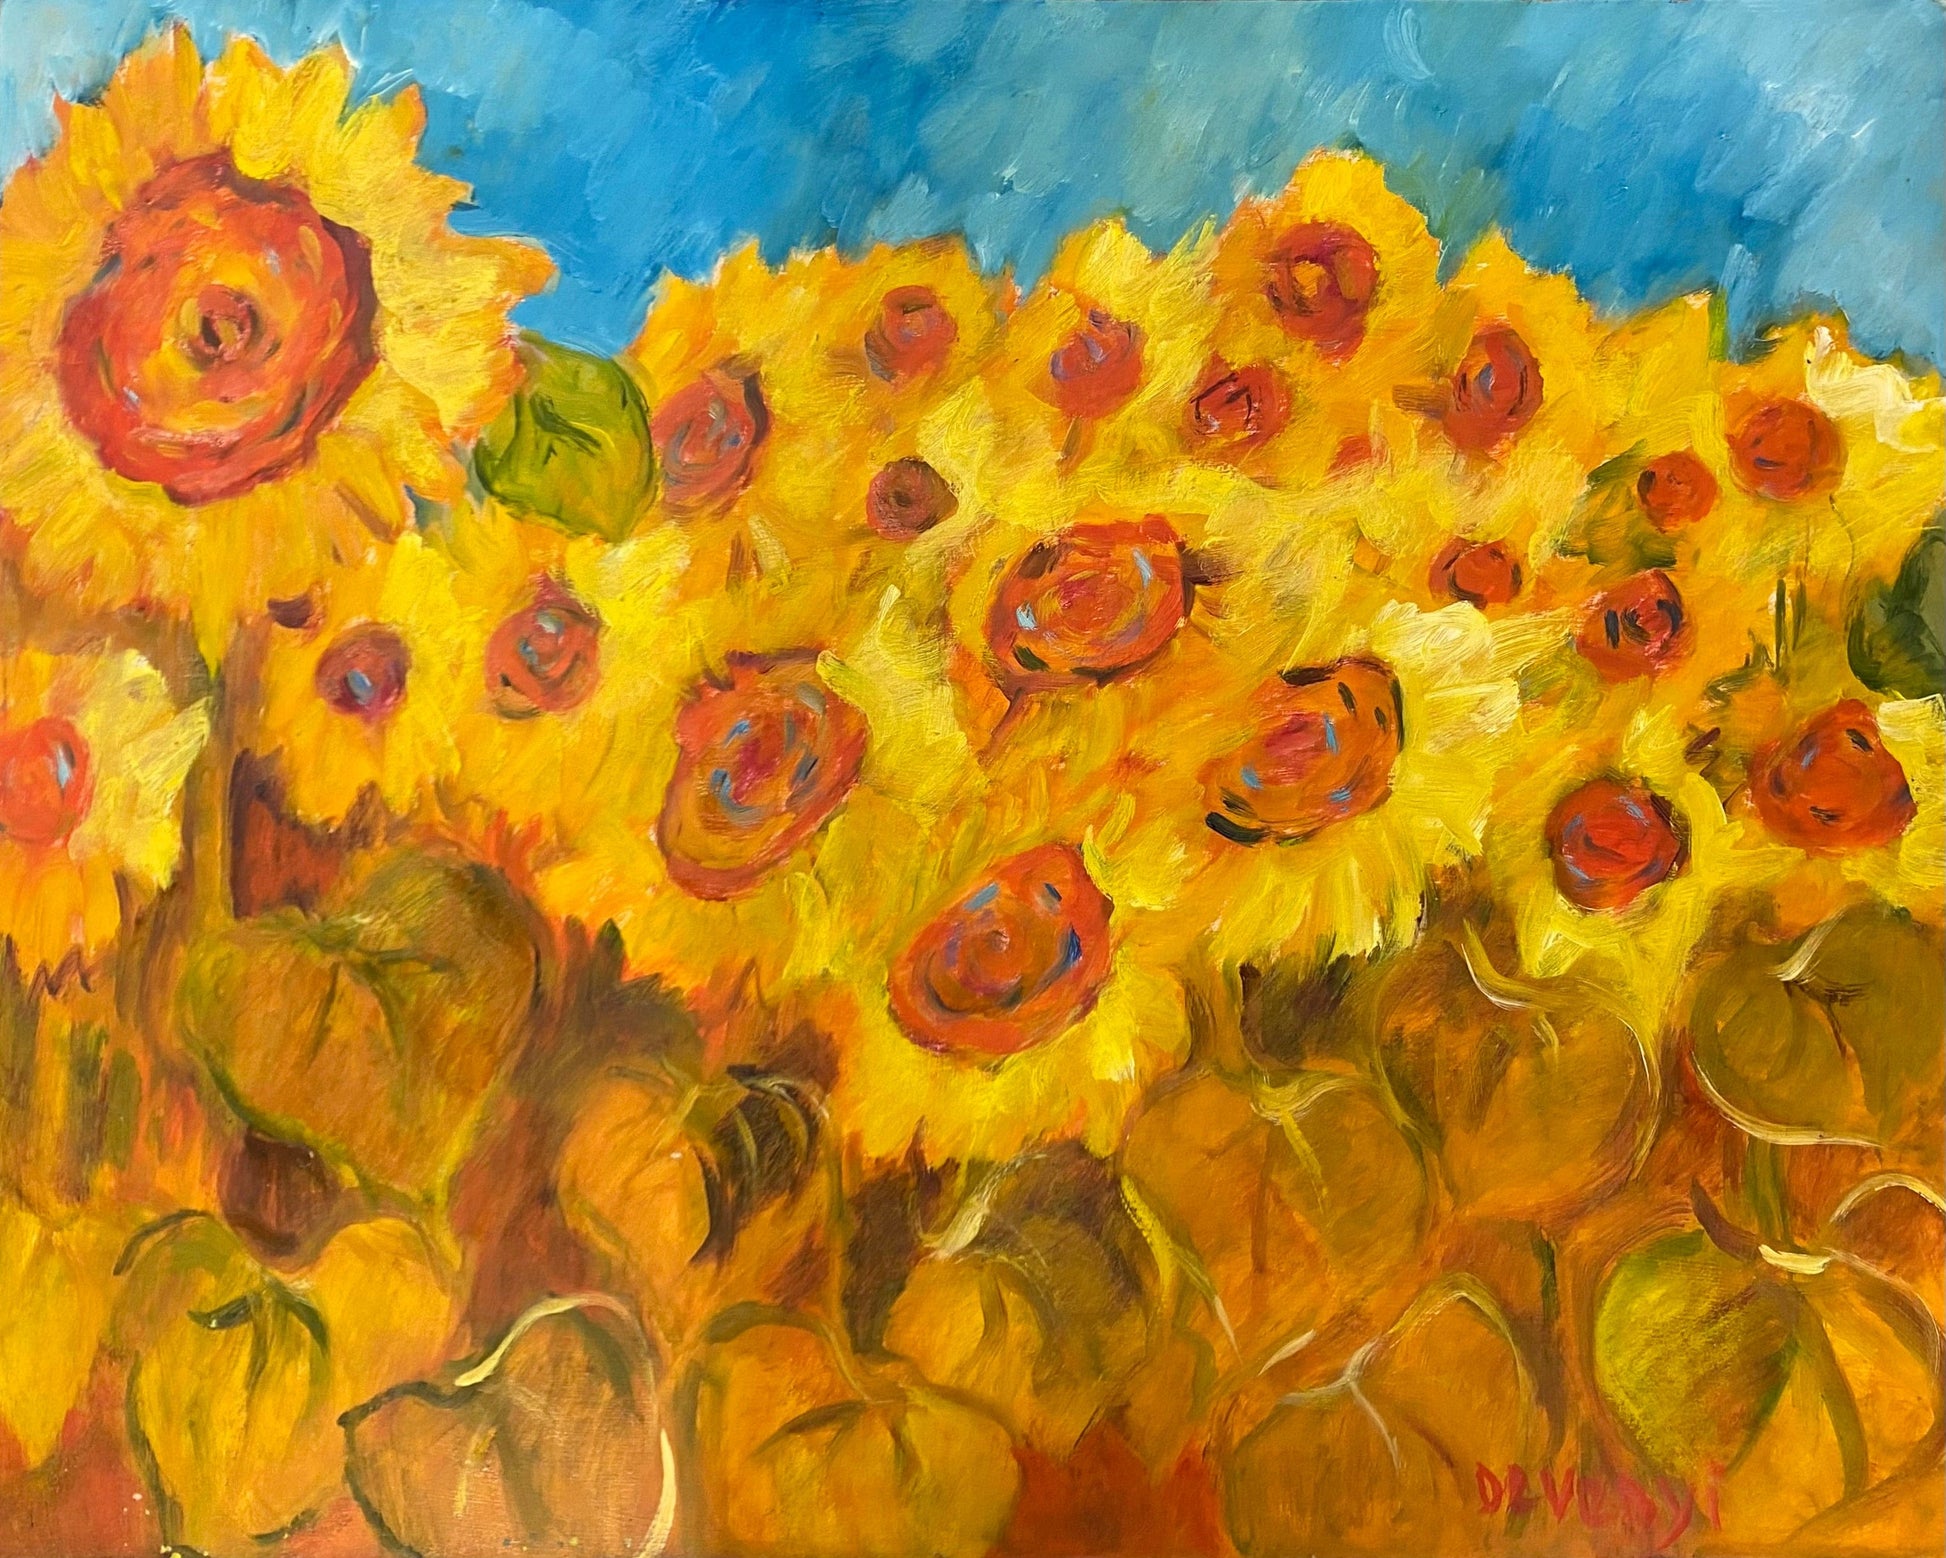 Margaret Devenyi painting A Sea Of Yellow Art Works Gallery